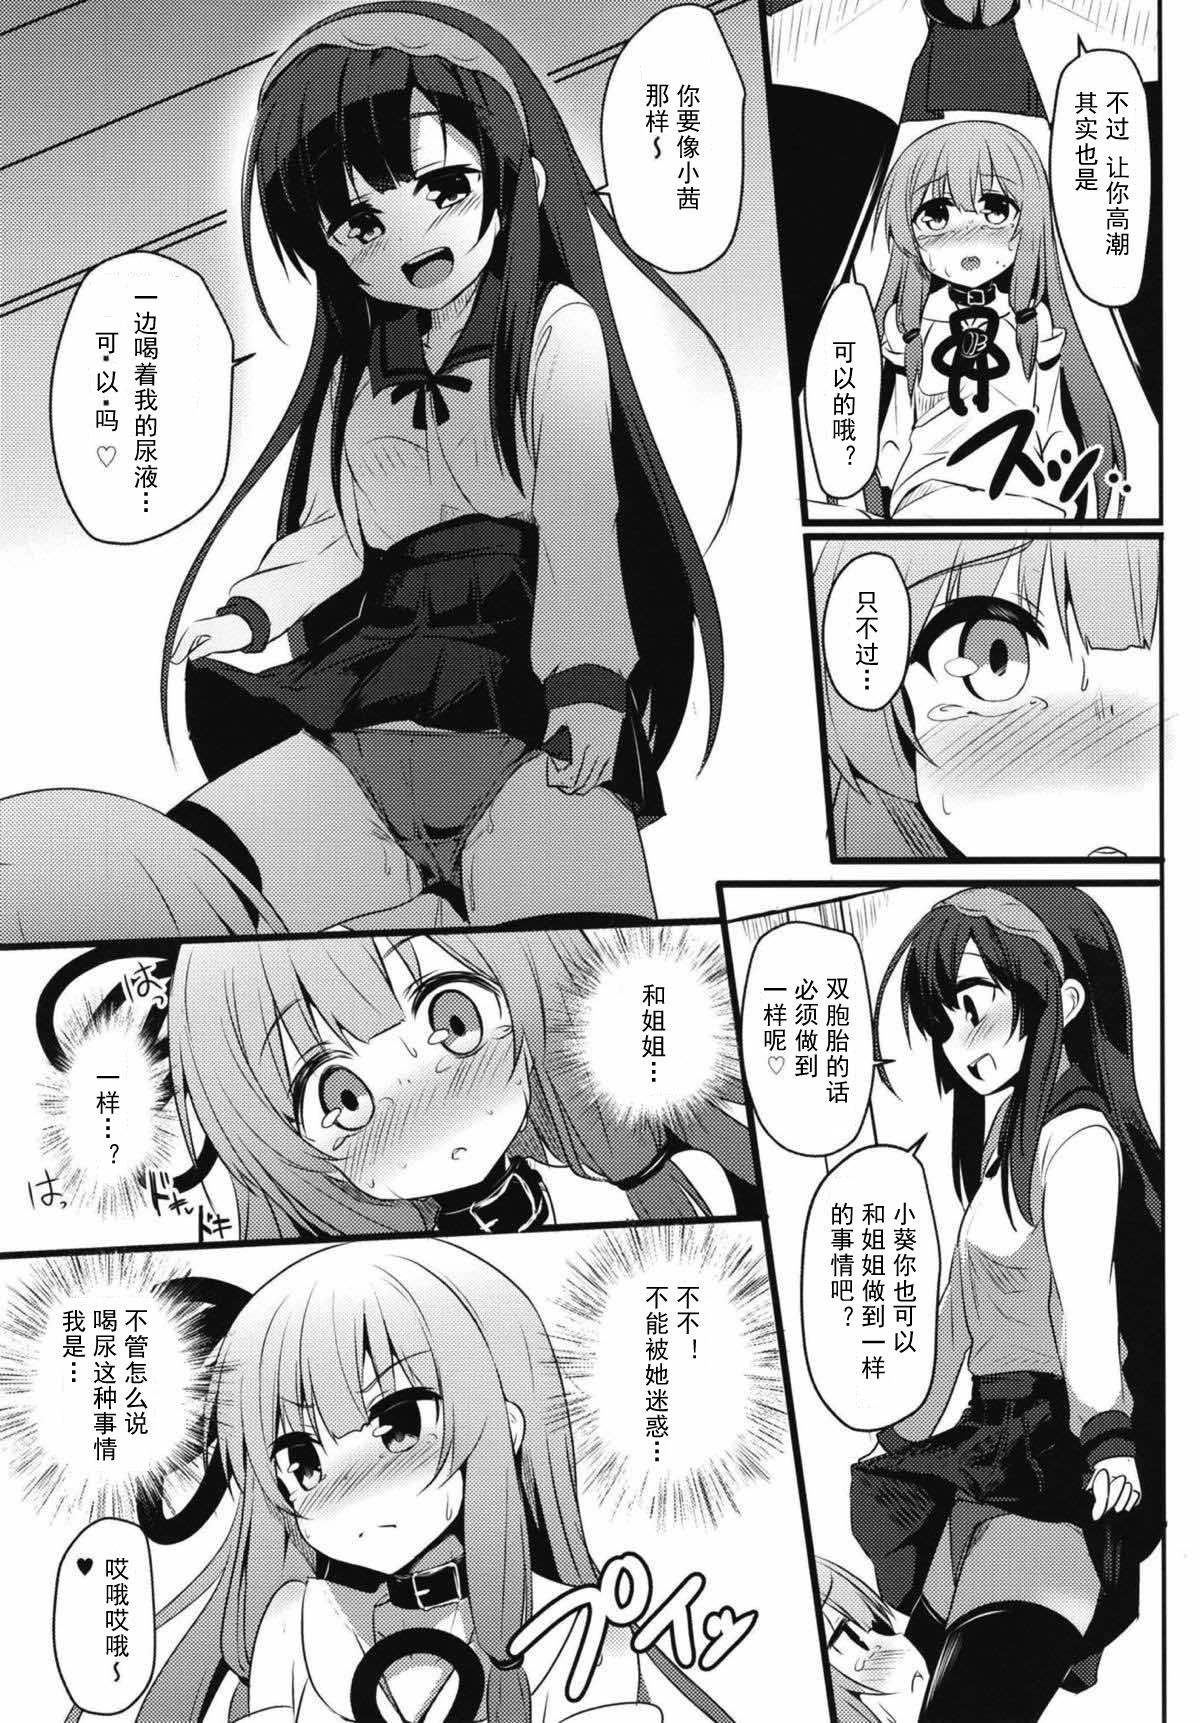 Jerkoff (Kotonoha's Festa 2) [Milk Pudding (Jamcy)] Akane-chan Challenge! 2.5-kaime (VOICEROID) [Chinese] [古早个人汉化] - Voiceroid Hard Cock - Page 11